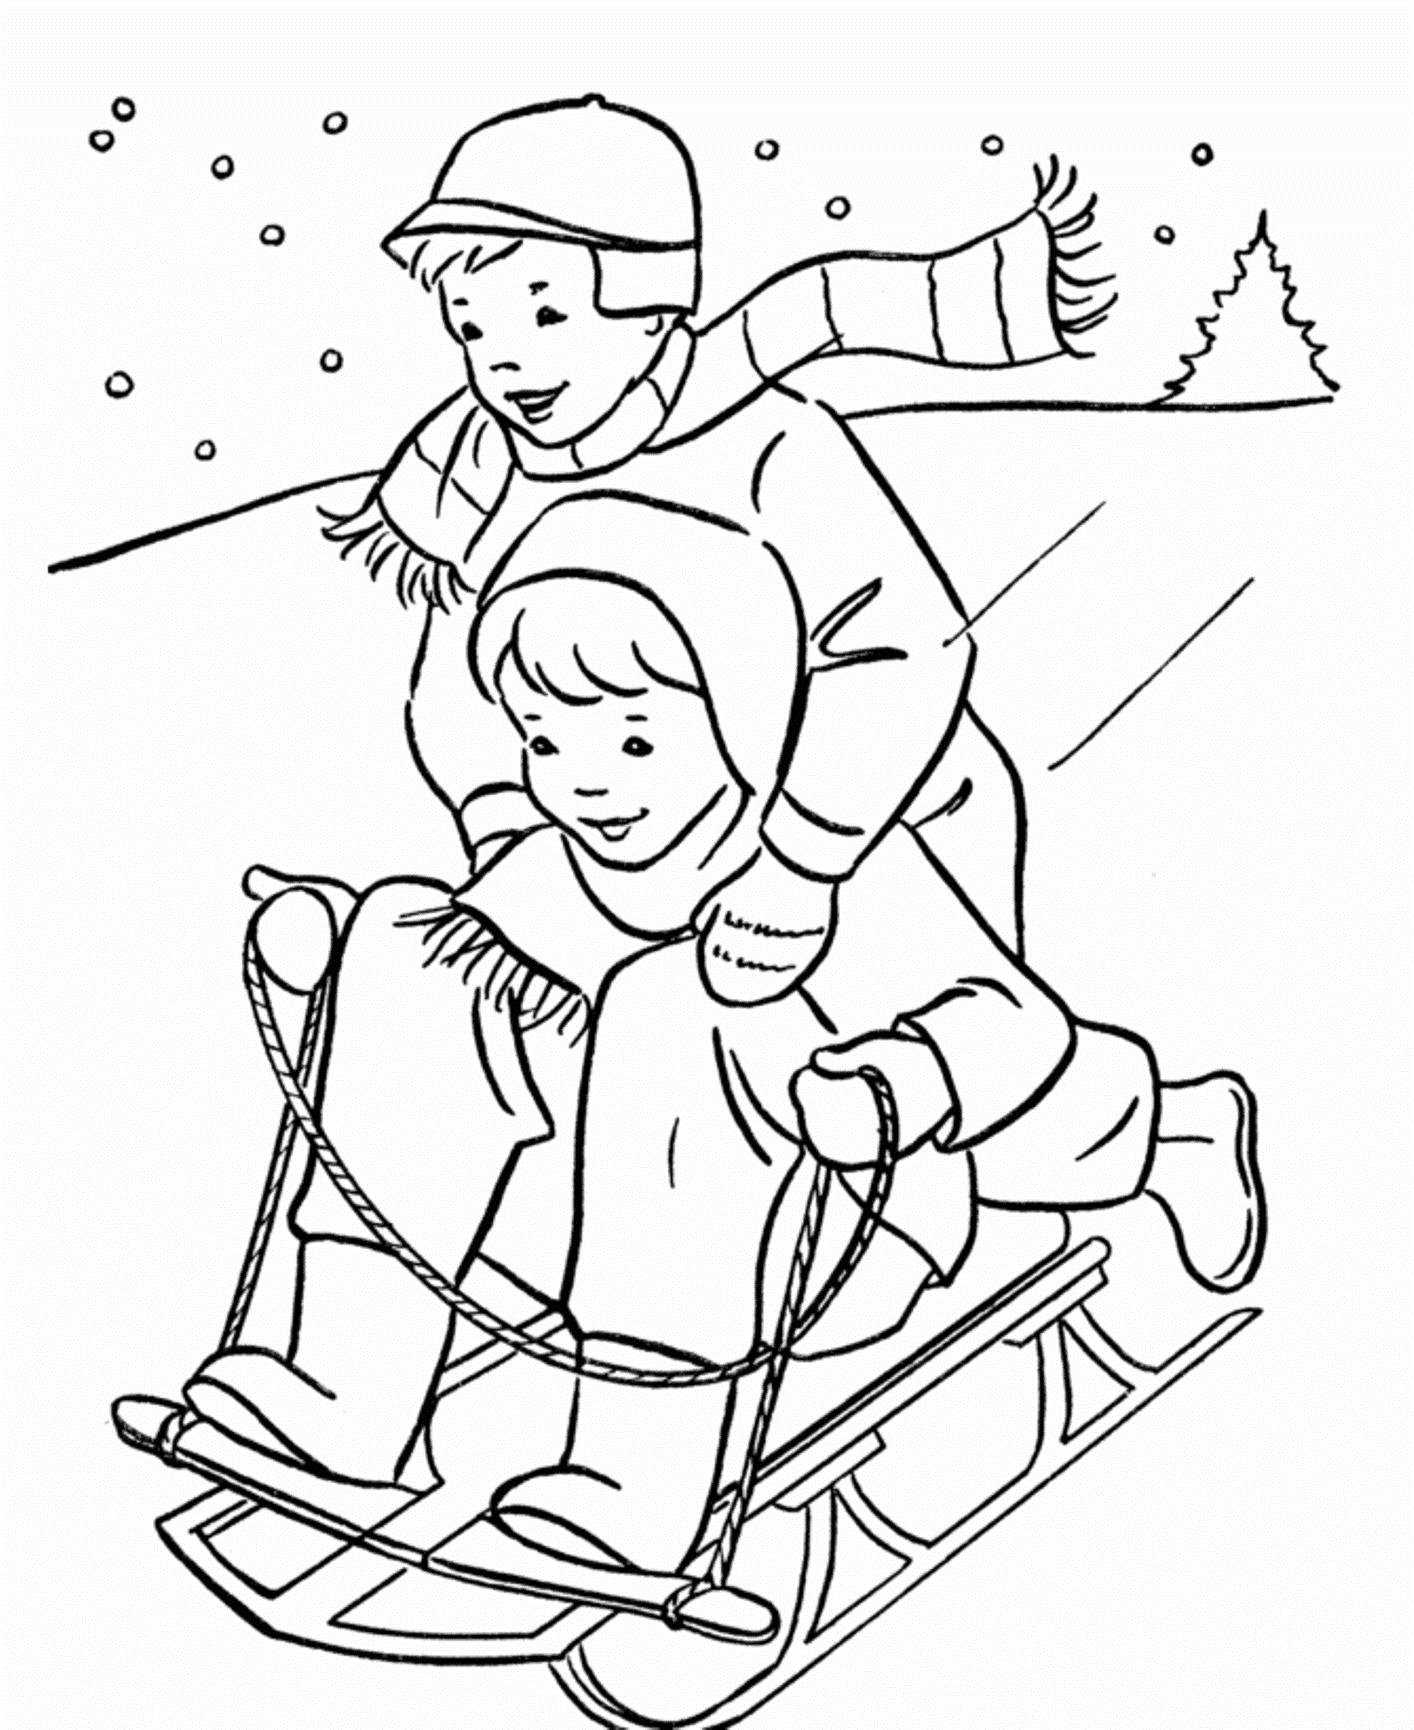 Kids Playing Sled In The Winter Coloring Pages | Winter Coloring ...